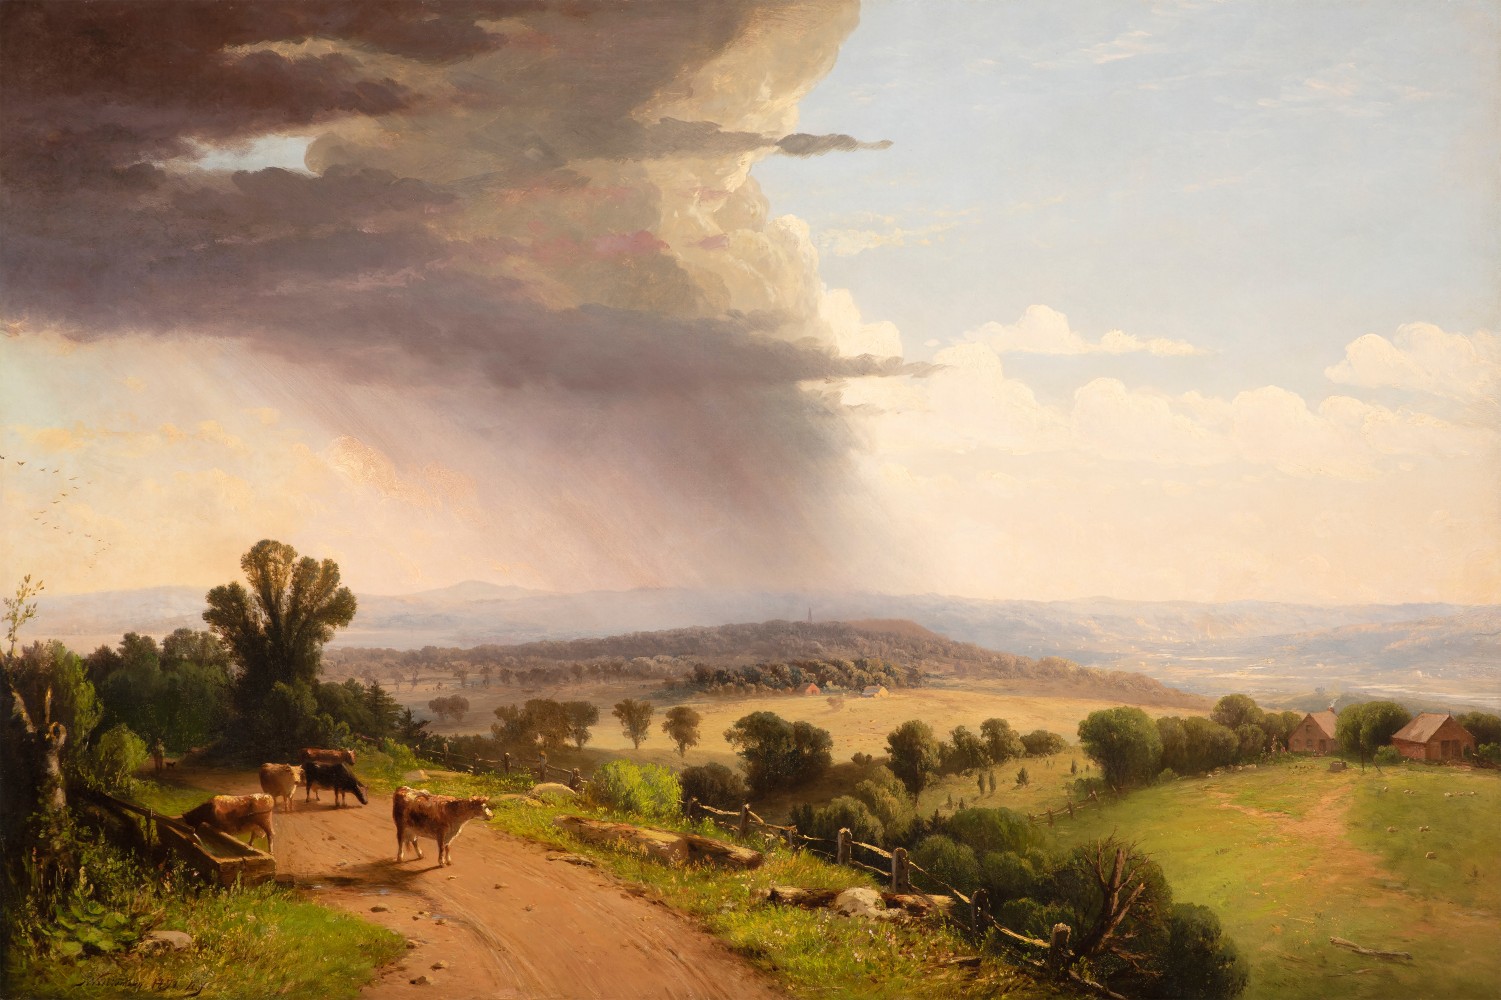 John Williamson (1826–1885), Passing Shower, Upper Valley of the Connecticut River, 1870, oil on canvas, 27 1/8 x 40 in., signed and dated lower left: J. Williamson. 1870. N.Y, inscribed on verso: Passing Shower / Upper Valley of the Connecticut / J Williamson / N.Y. 1870